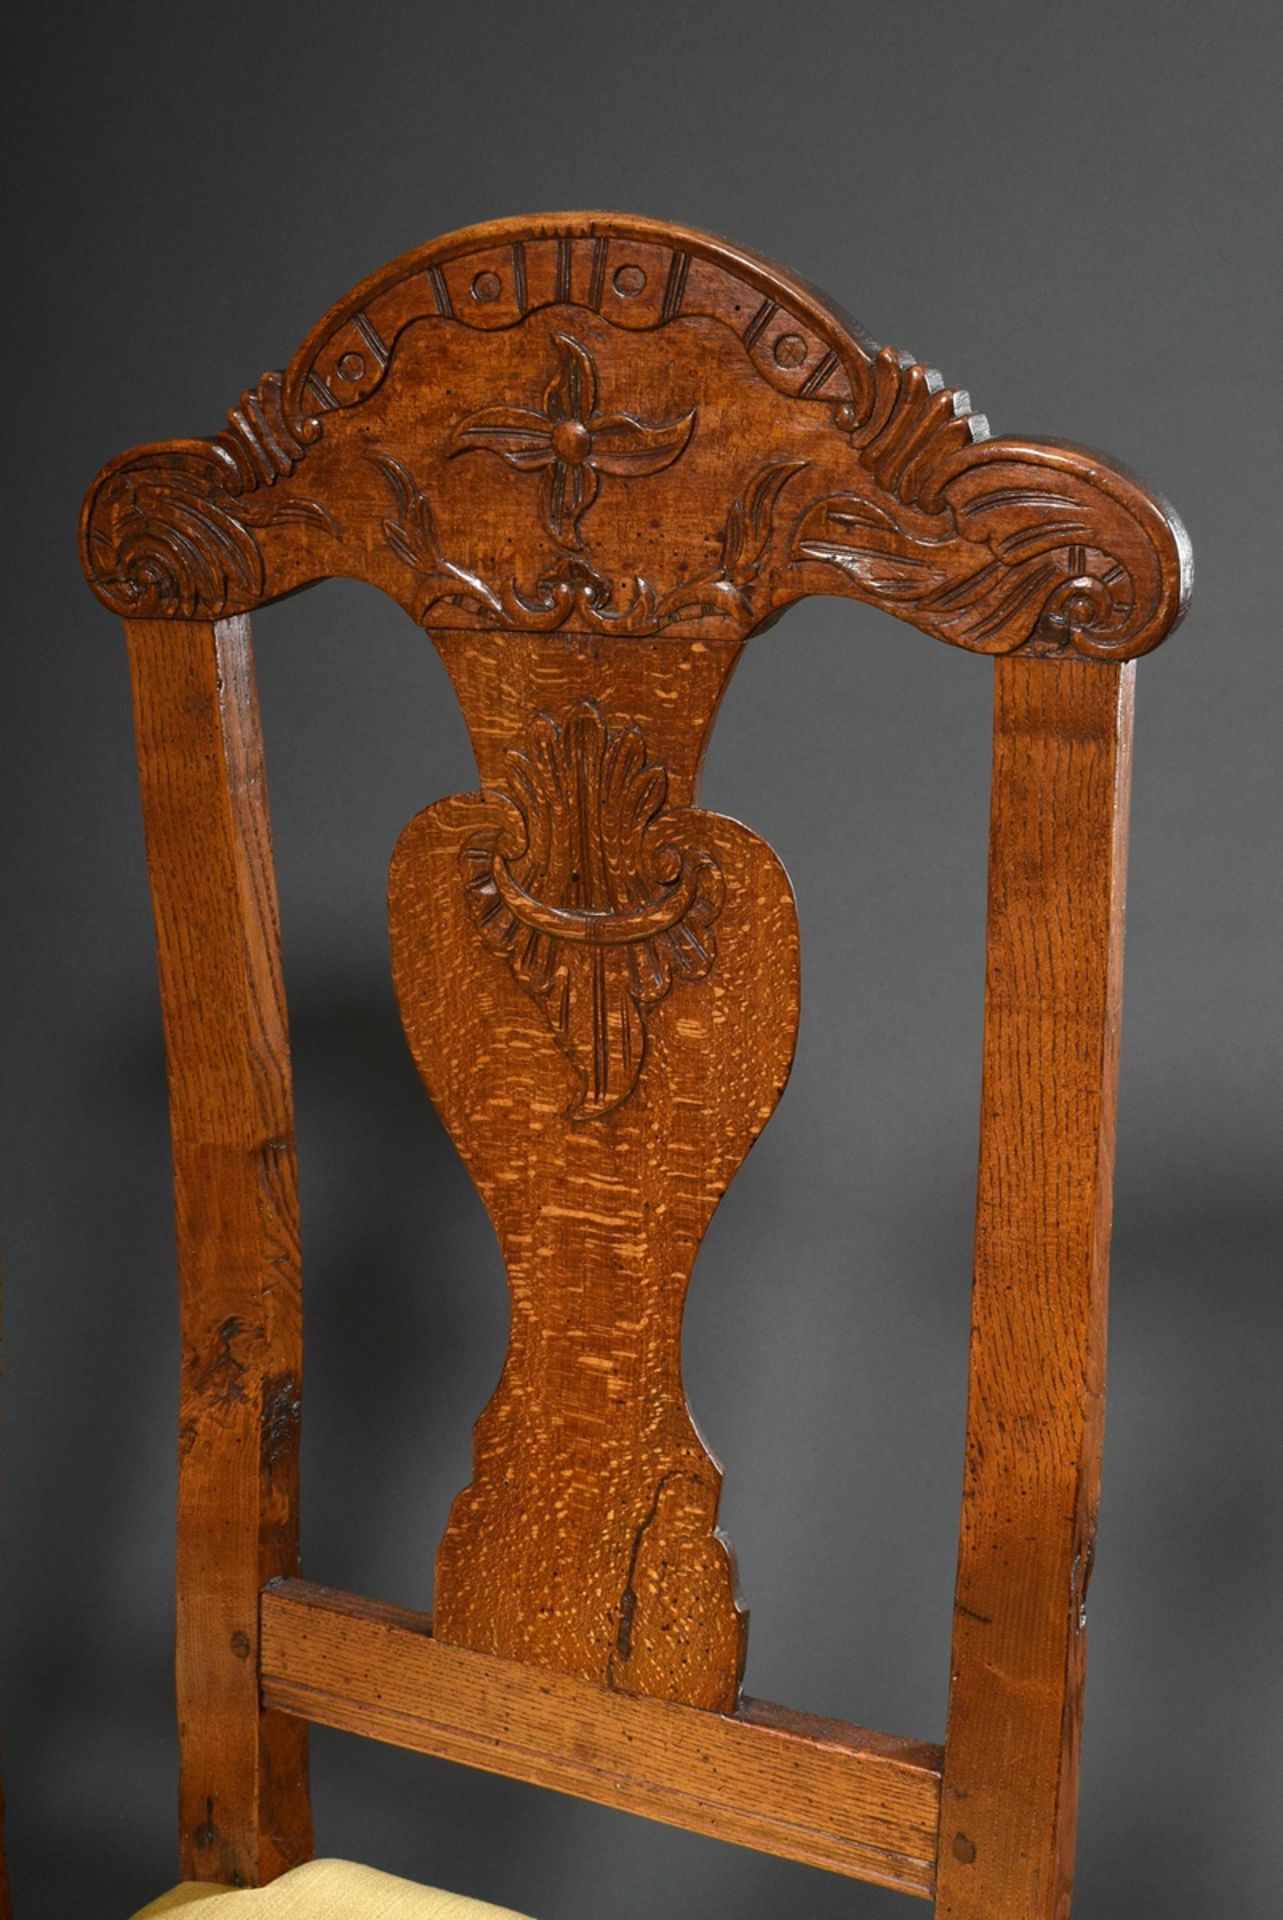 4 Flensburg Baroque chairs with floral carved back board, oak, 1st half 18th c., h. 48/110cm - Image 3 of 7